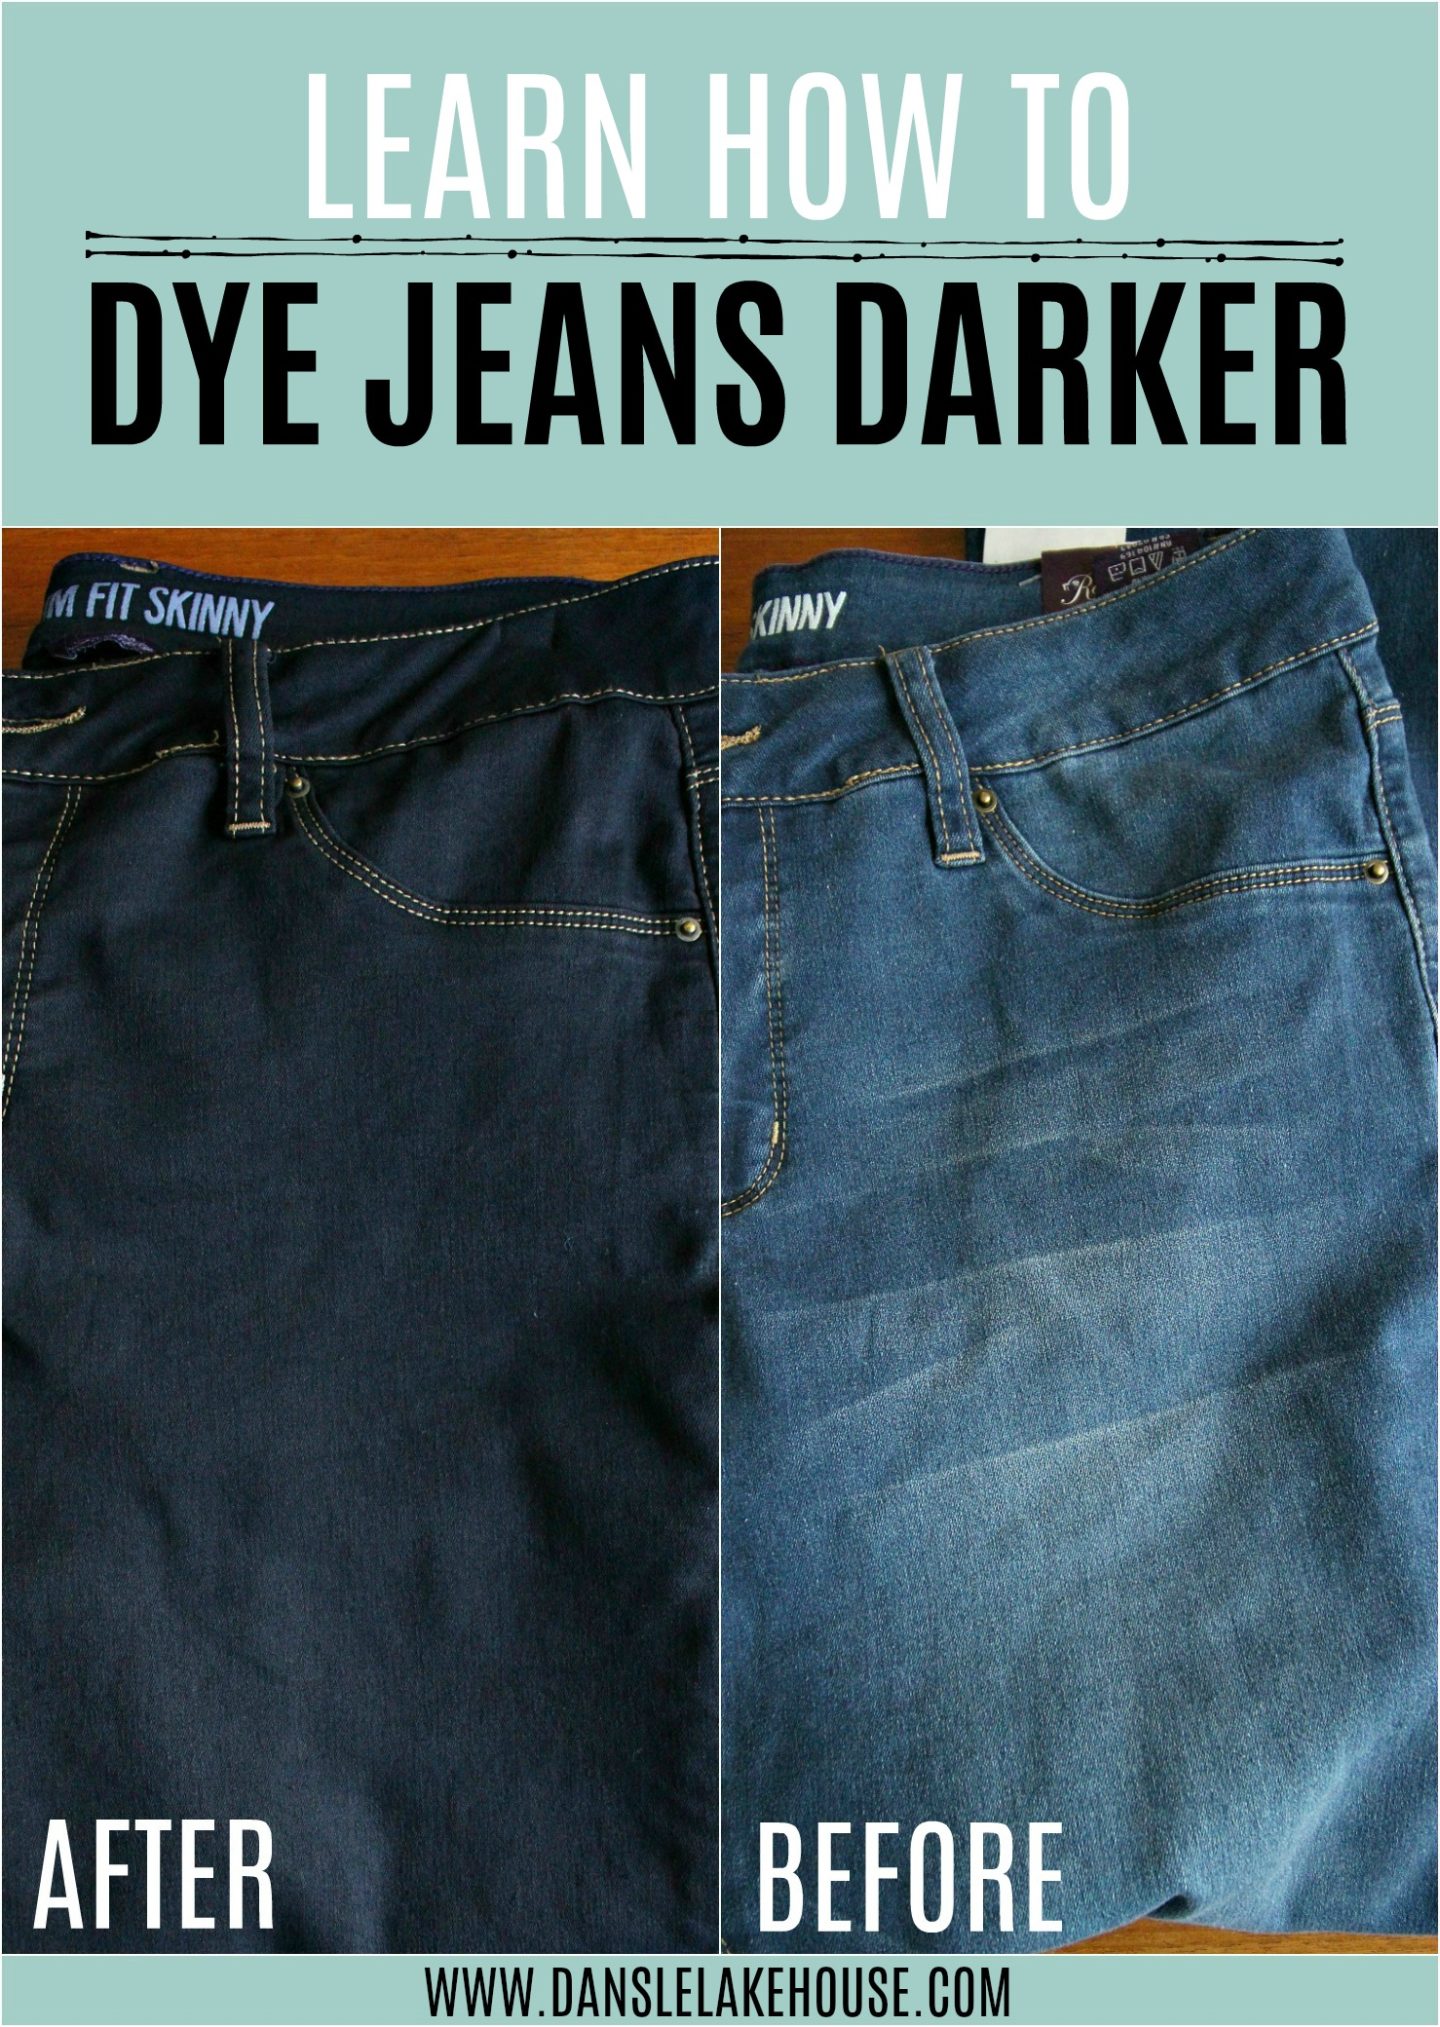 Learn how to dye jeans darker with these easy clothes dyeing tutorial. Dye new or old jeans a dark blue in the wash. #dyeing #dyeingclothes